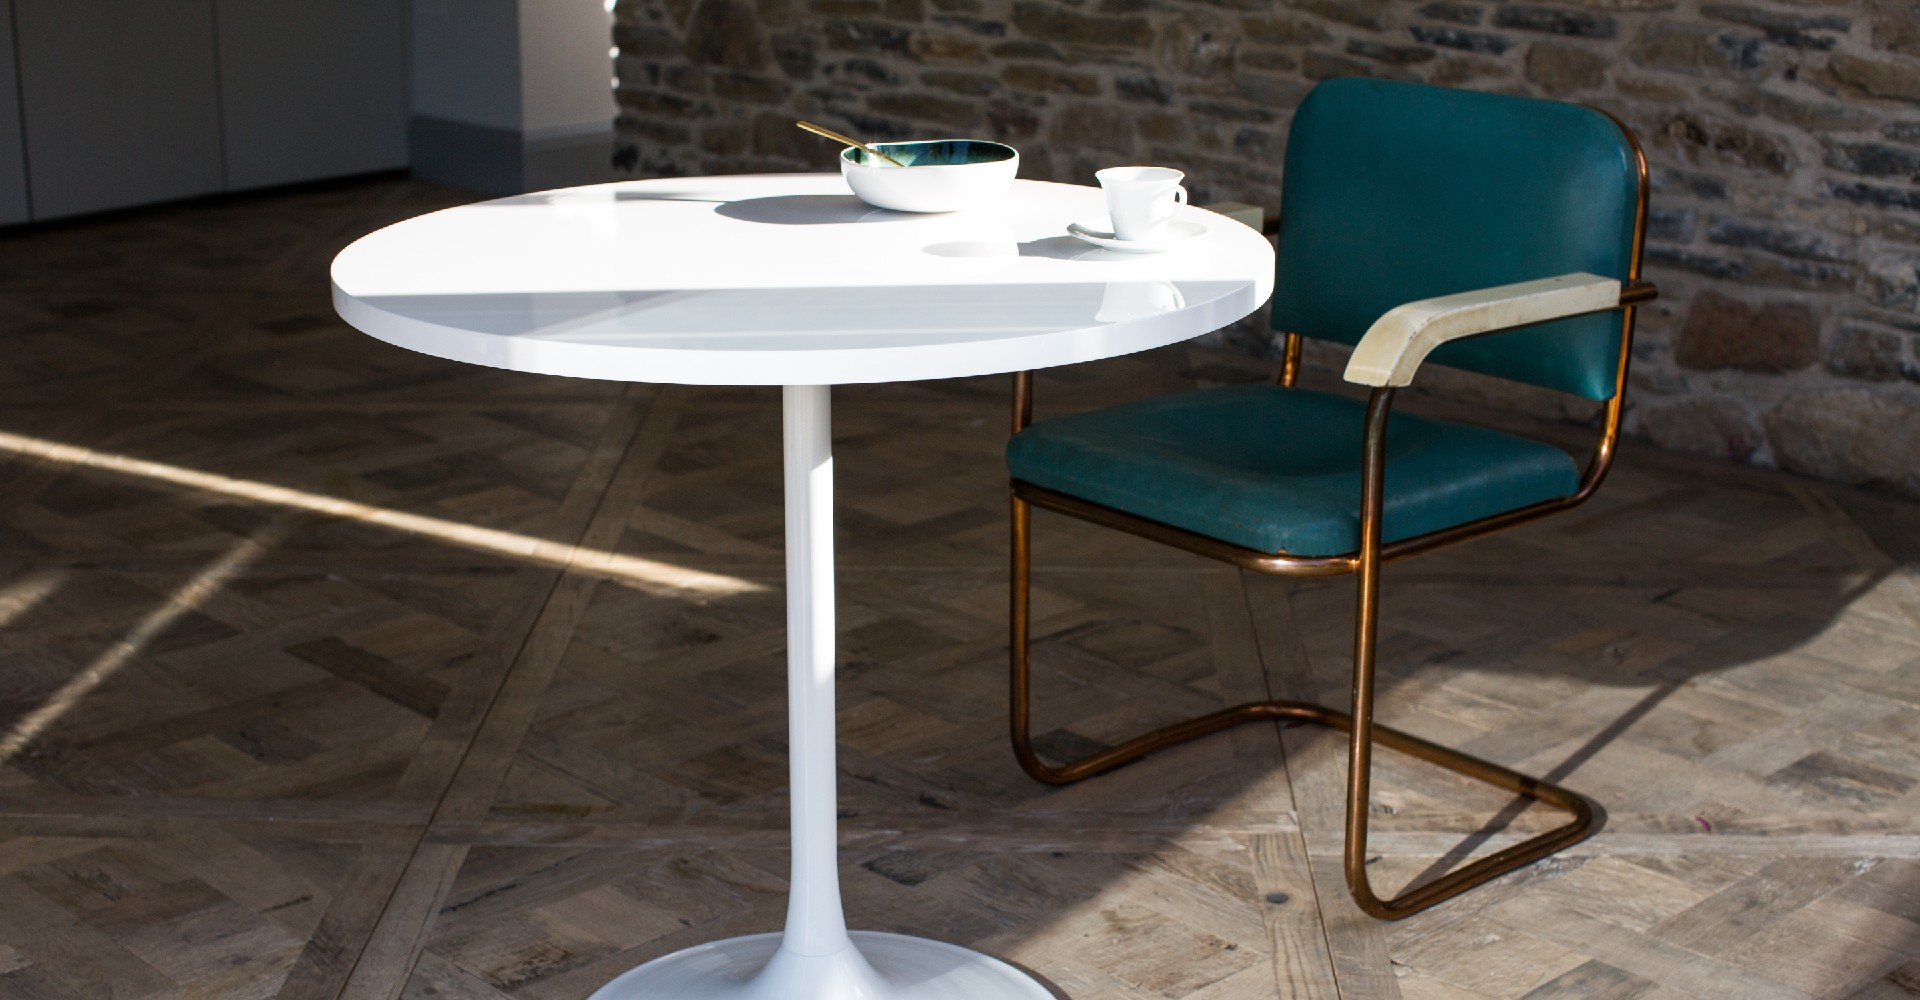 Swan Dining Table With Gloss White Top & White Pedestal © GillmoreSPACE Ltd